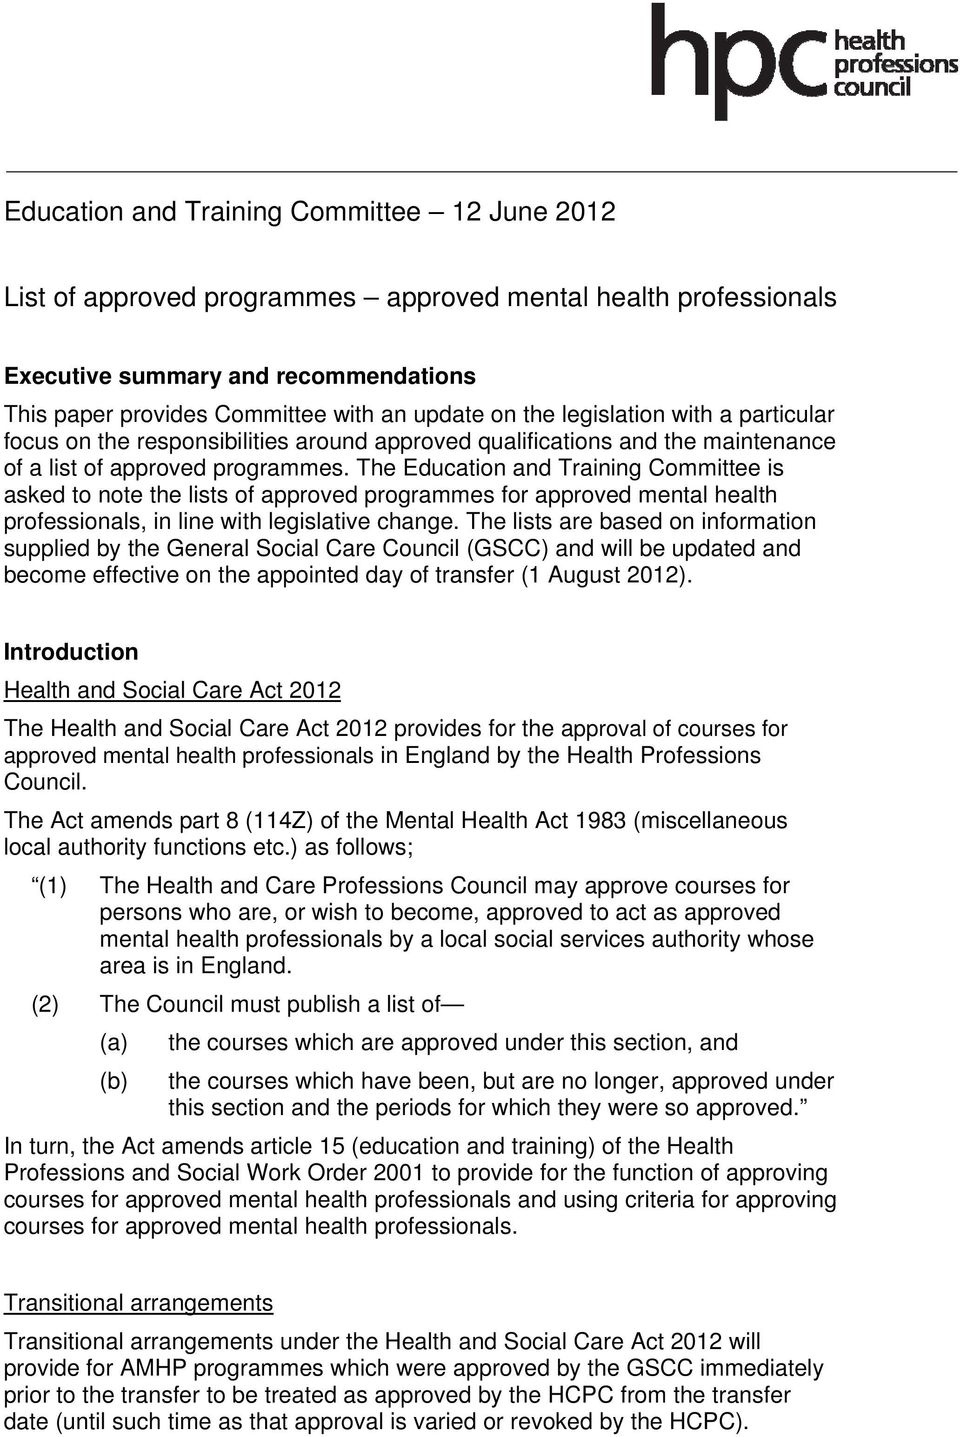 The Education and Training Committee is asked to note the lists of approved programmes for approved mental health professionals, in line with legislative change.